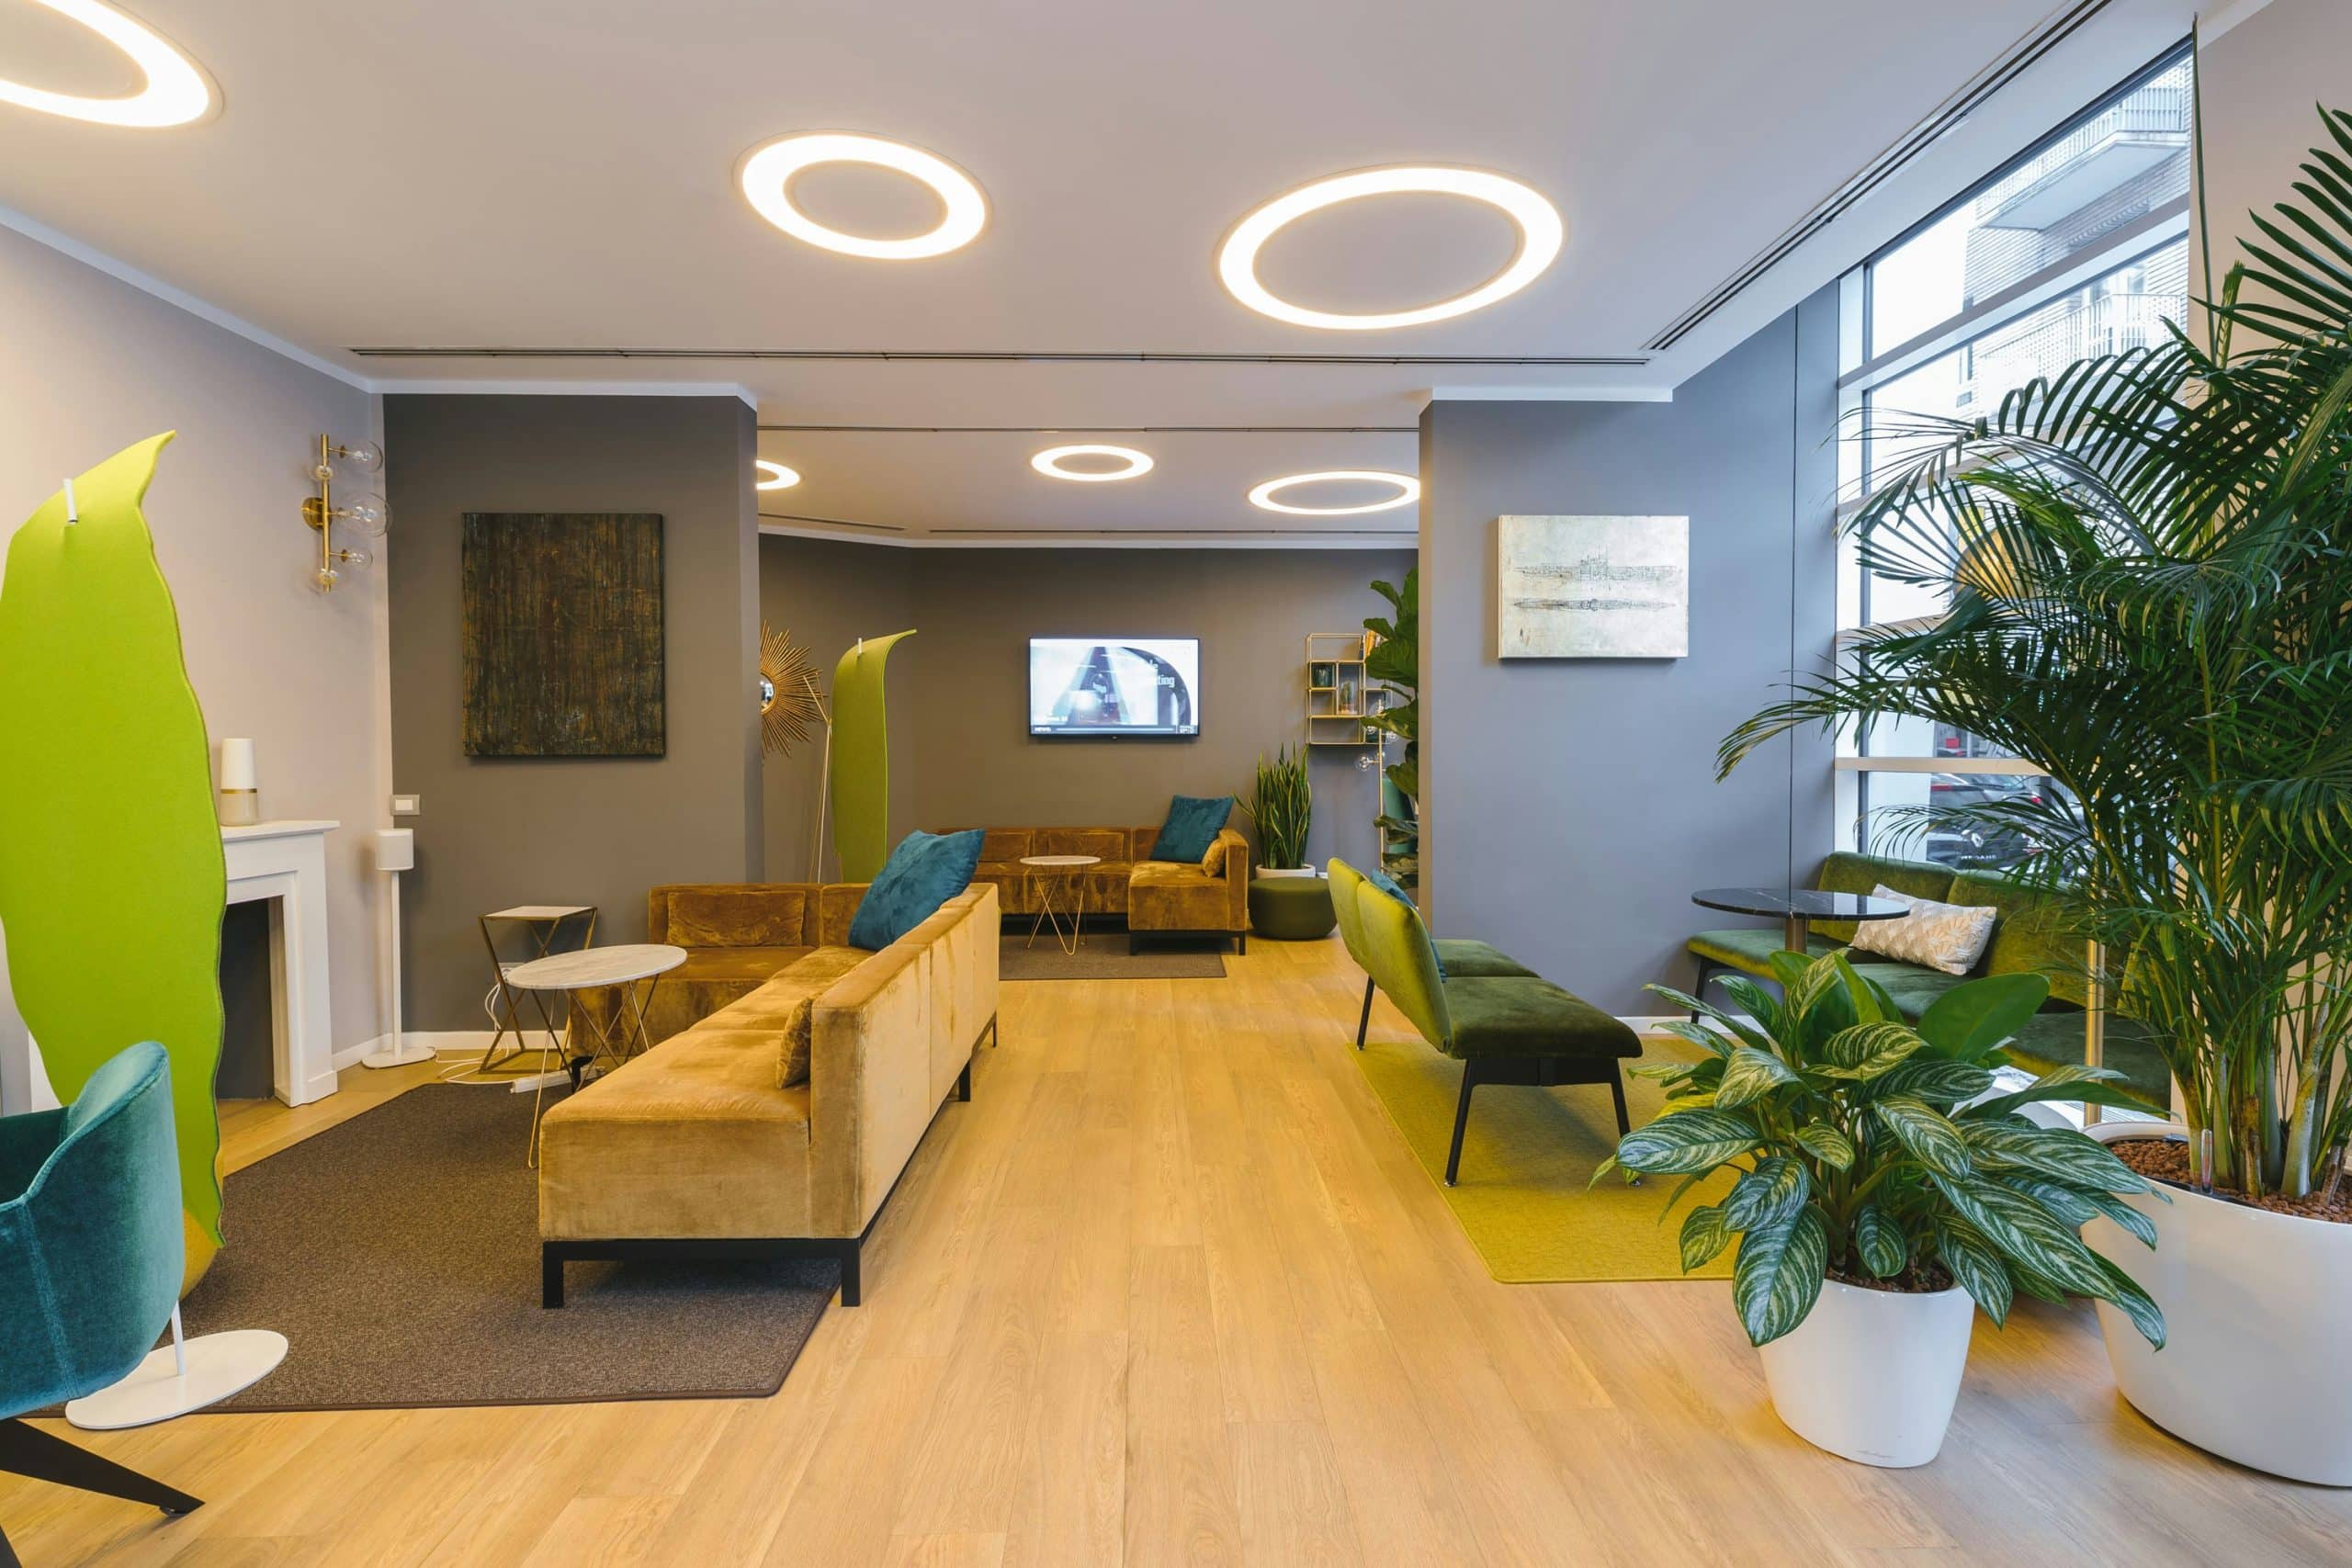 How to Create a Welcoming Reception Area for Your Business